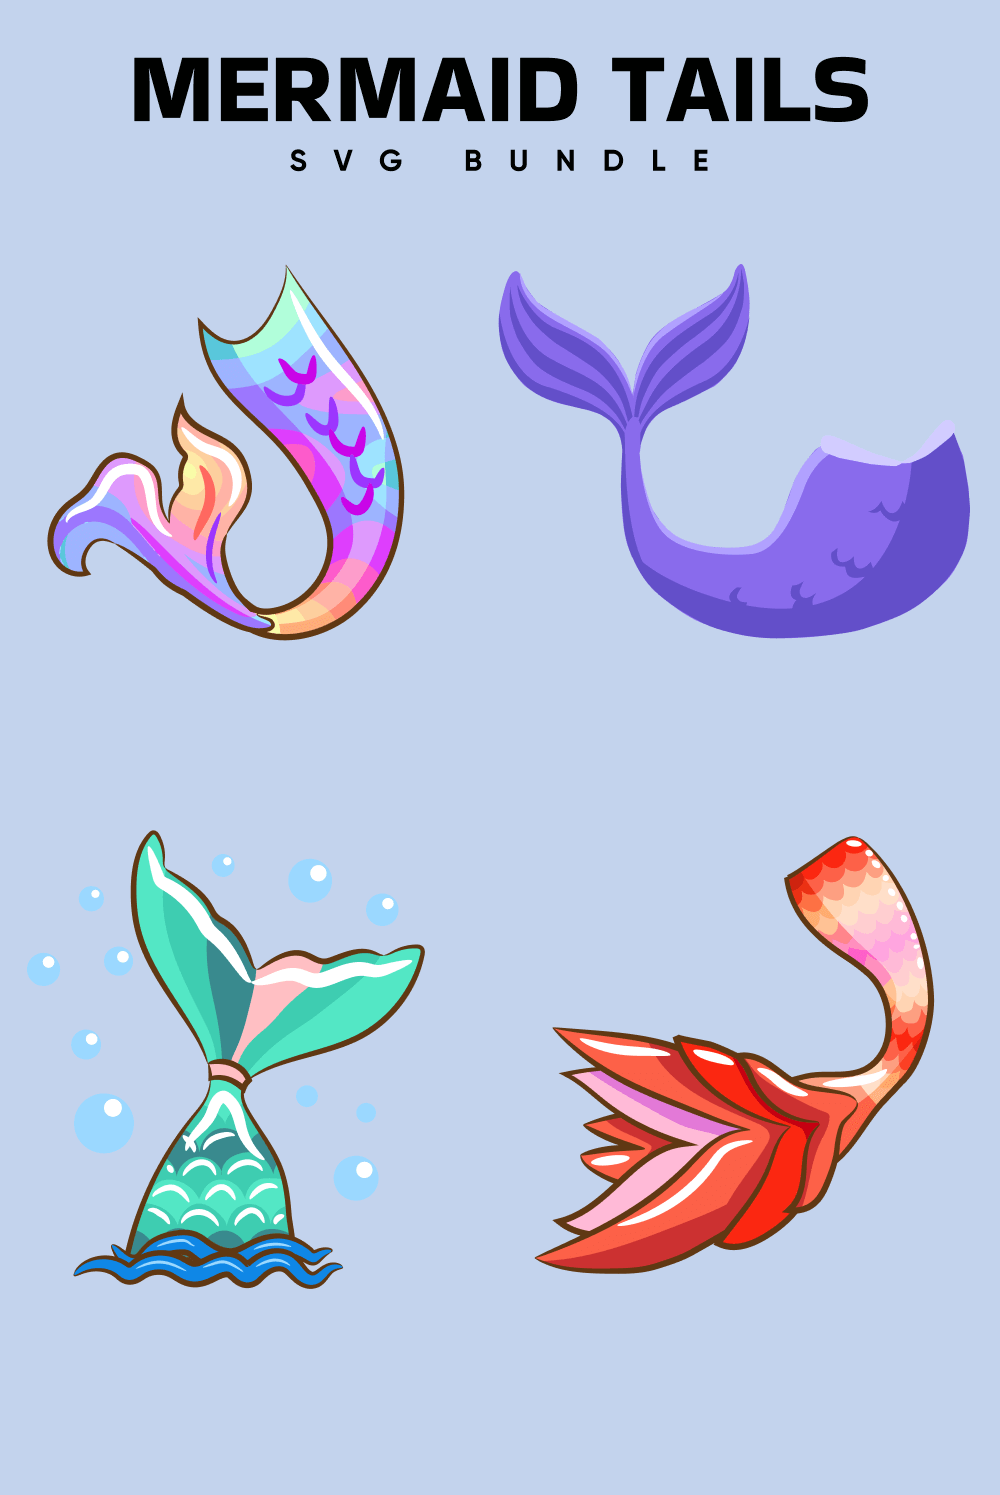 Purple, green, red and multicolored mermaid tails.